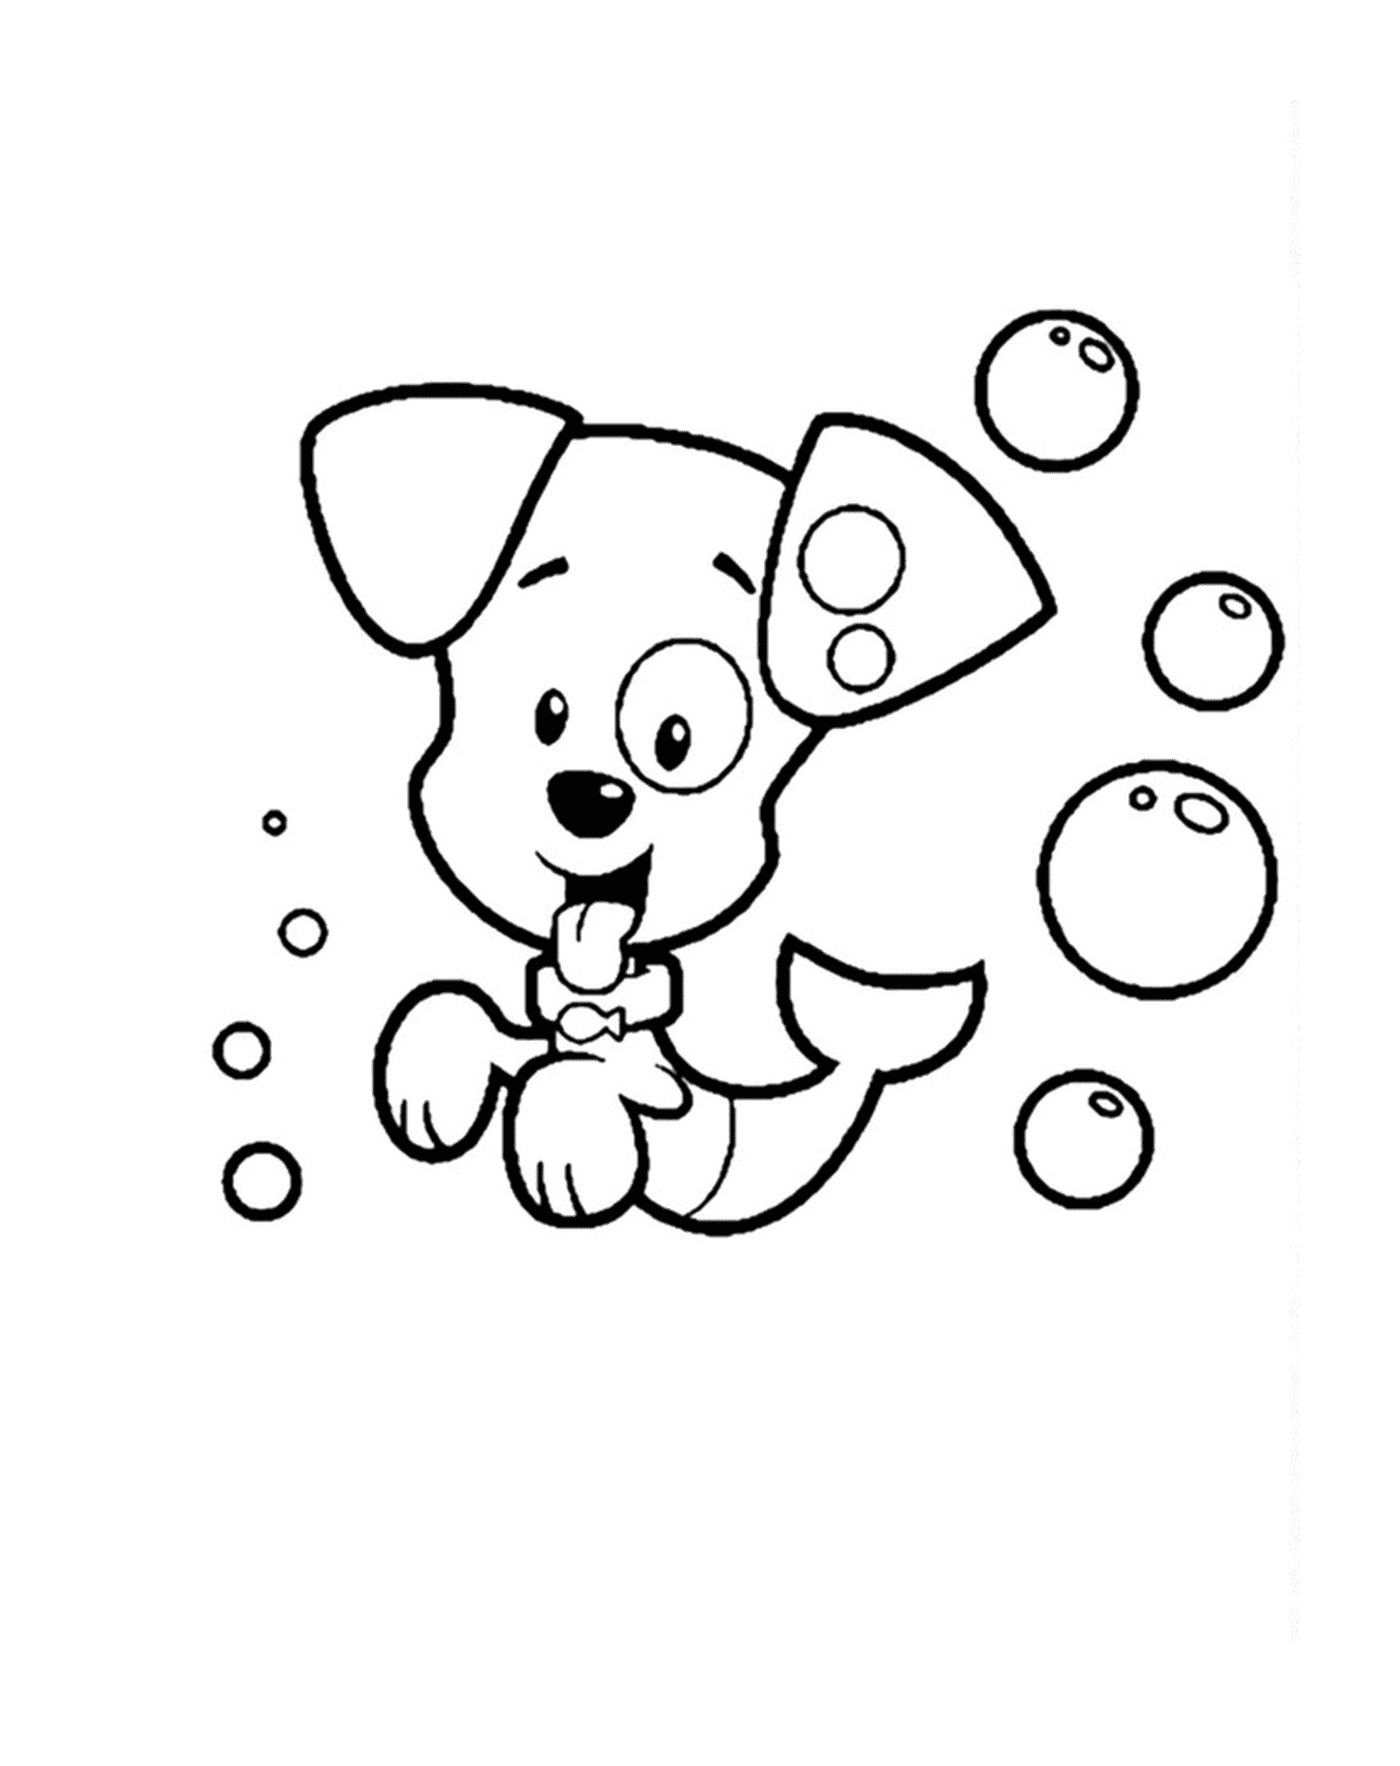  A dog surrounded by bubbles 